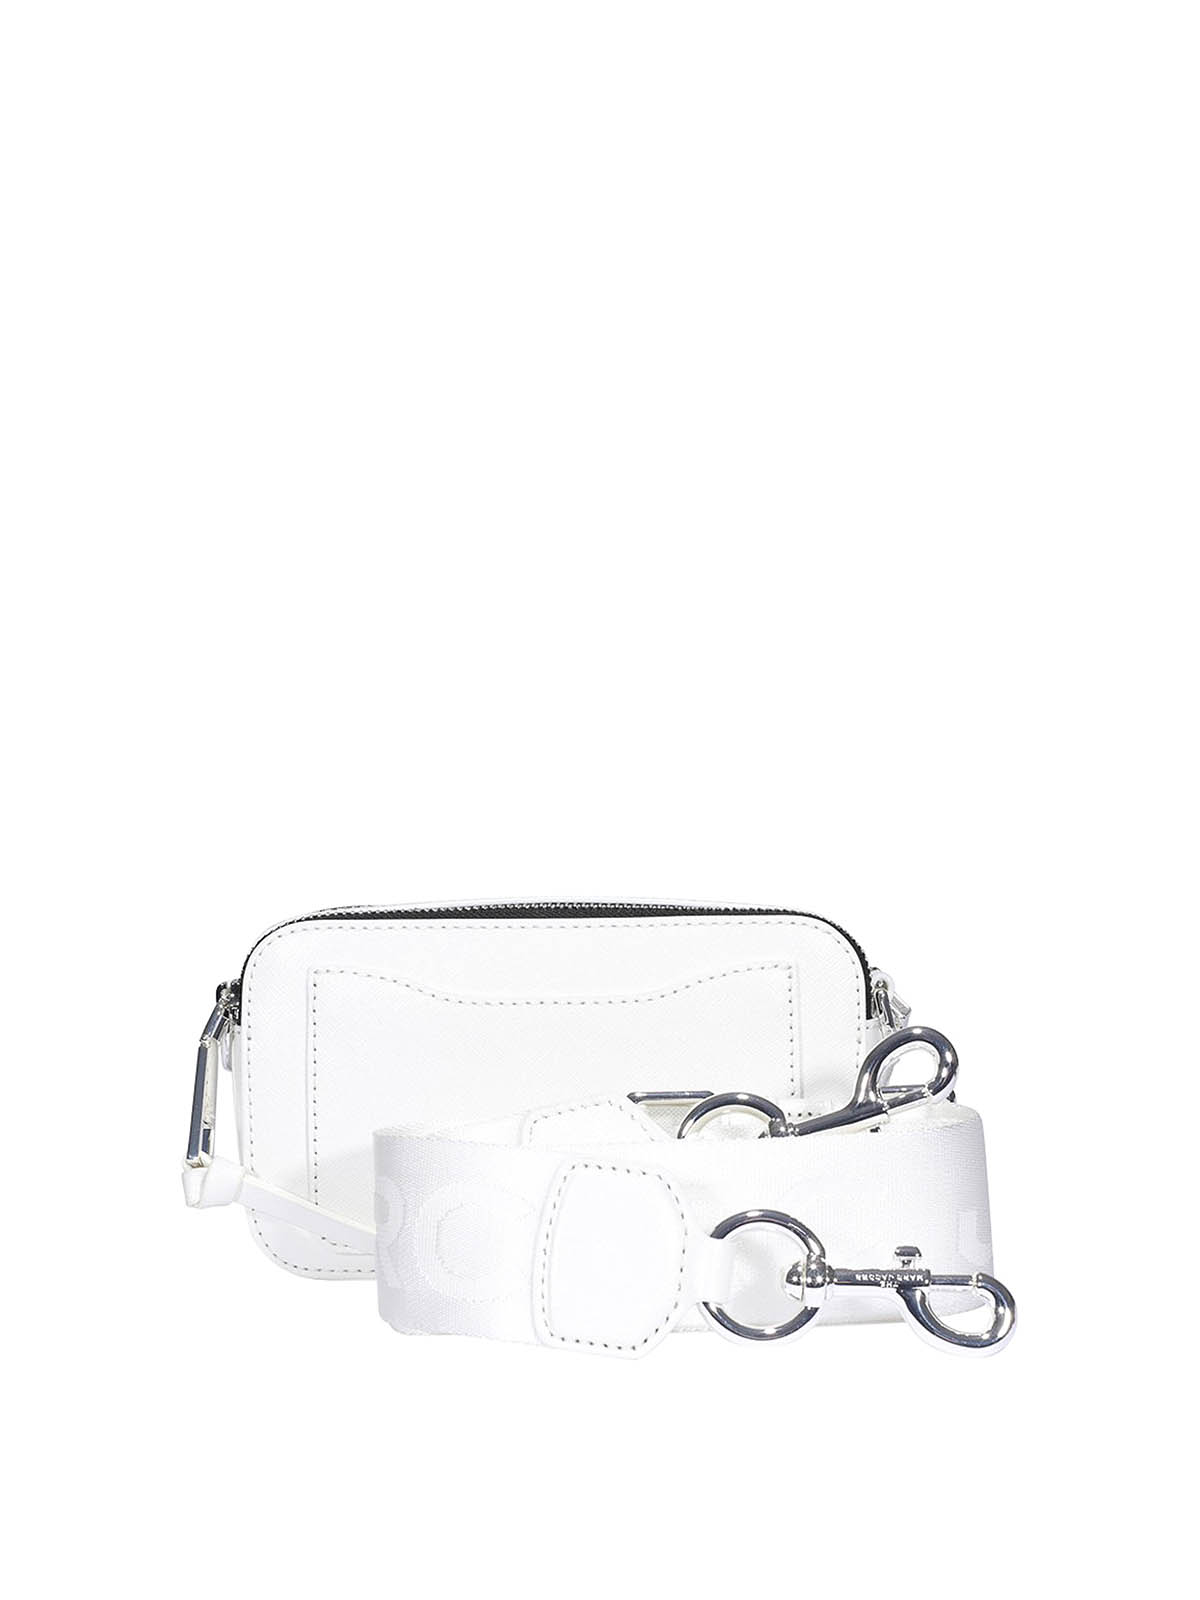 Marc Jacobs The Snapshot Leather Cross Body Bag in Black